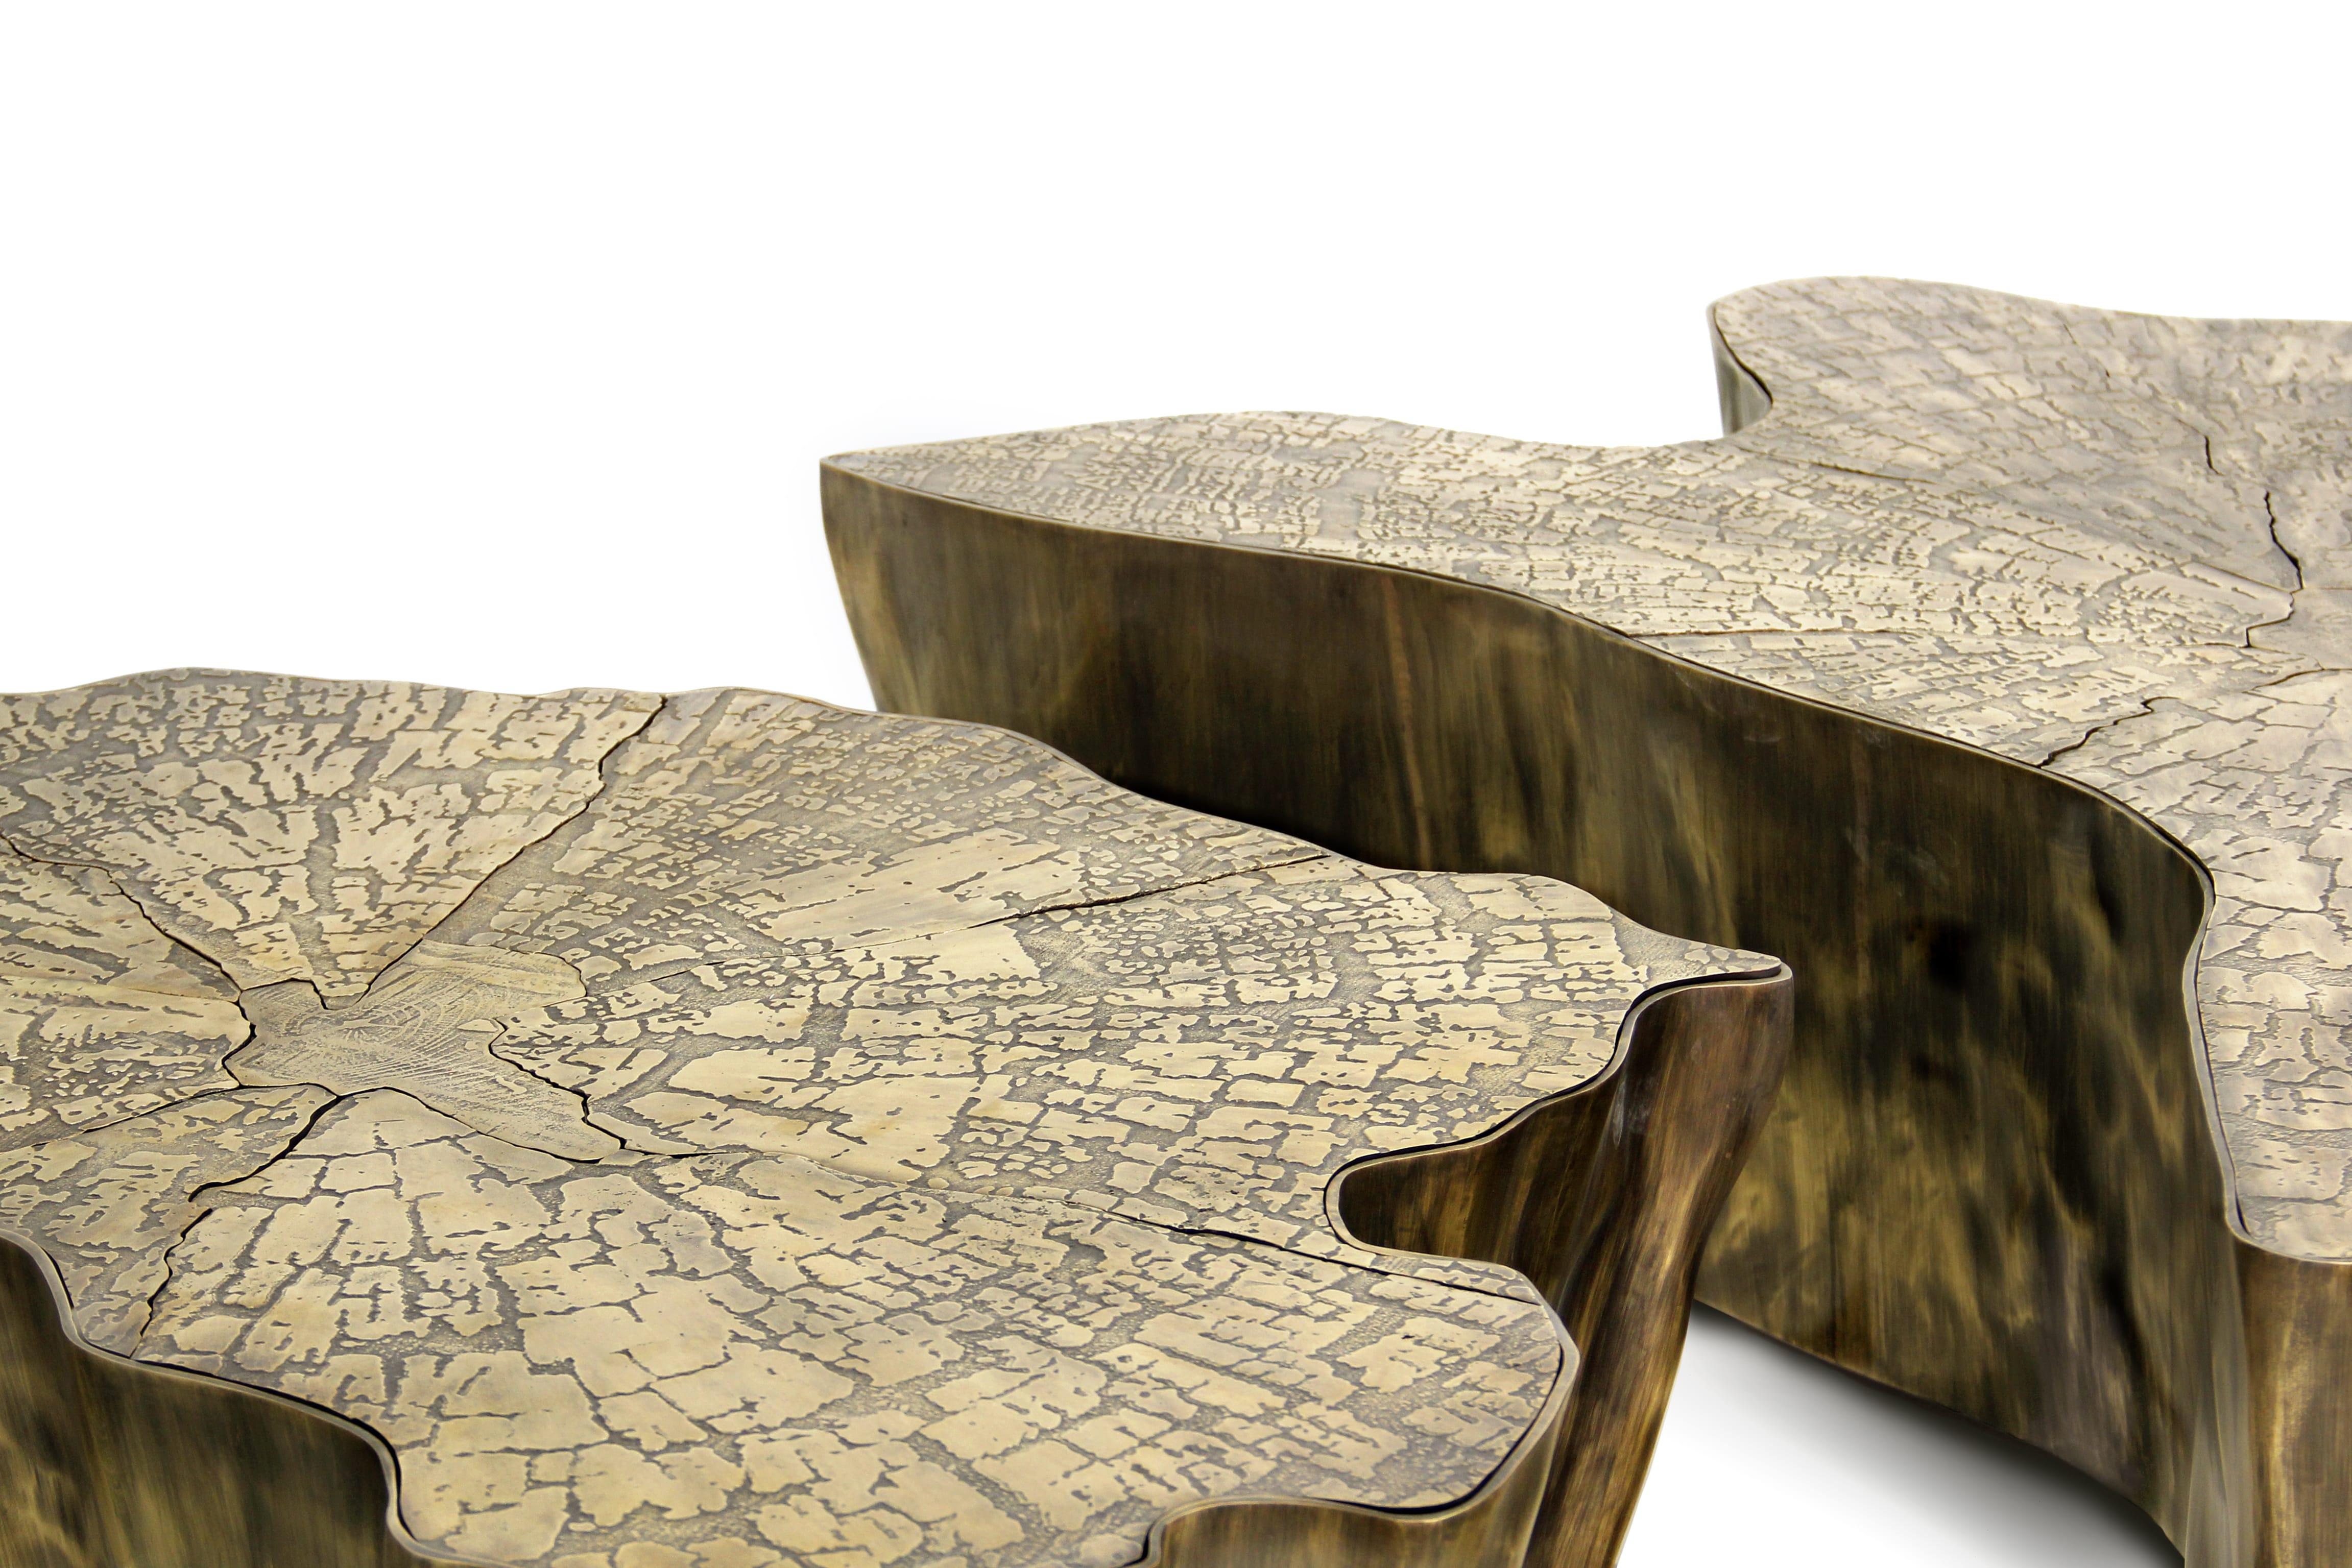 Portuguese Samples of Eden Big Center Table in Patina Casted Brass